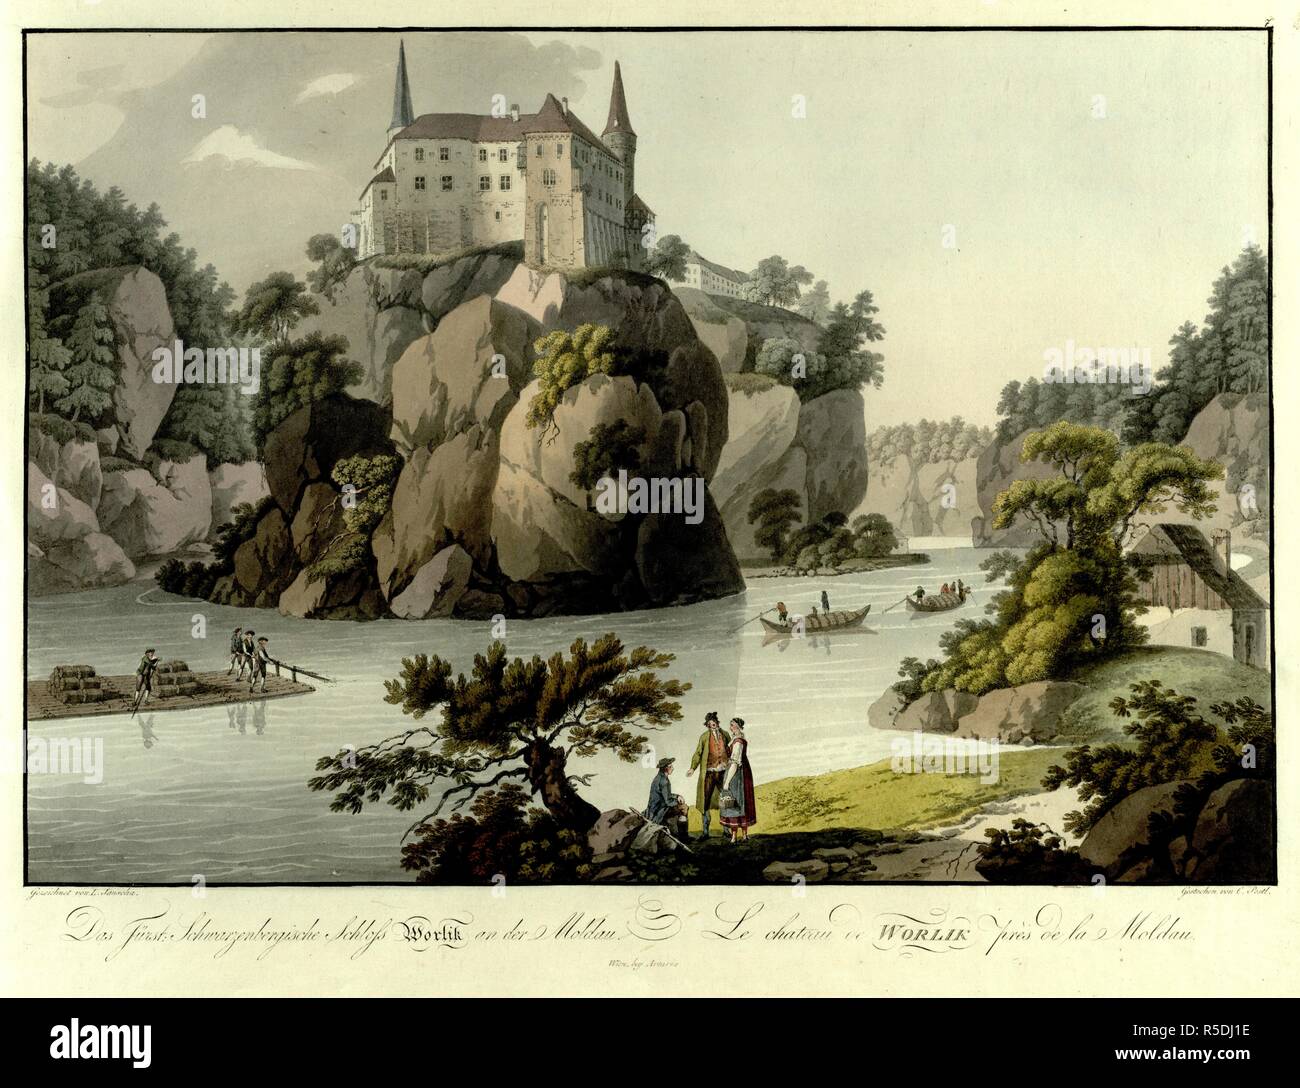 Two men and a woman dressed in traditional Bohemian costume talk by the Vtlava River in the foreground, with a view of OrlÃk and Vltavou Castle on the opposite bank in the background . Collection de Vues les plus intÃ©ressantes et pittoresques de la BohÃ©me. Wien : bey Artaria, [between 1800 and 1810]. Source: Maps 7.TAB.38, plate 8. Language: German and French. Stock Photo